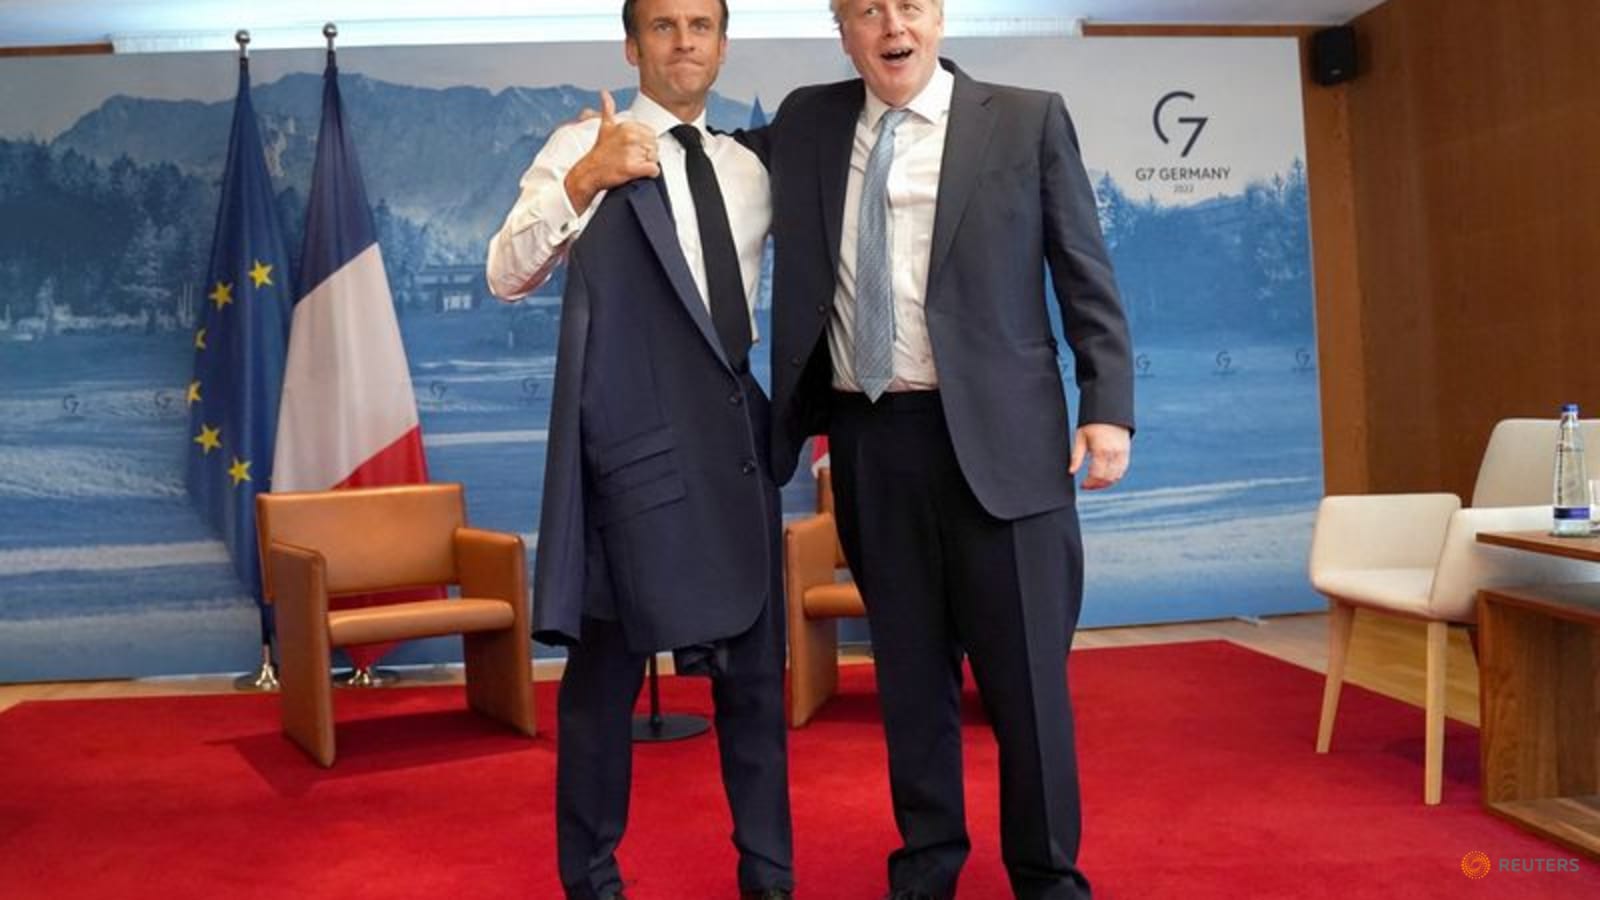 Pats on back, all smiles as Macron, Johnson appear to bury hatchet for G7 thumbnail